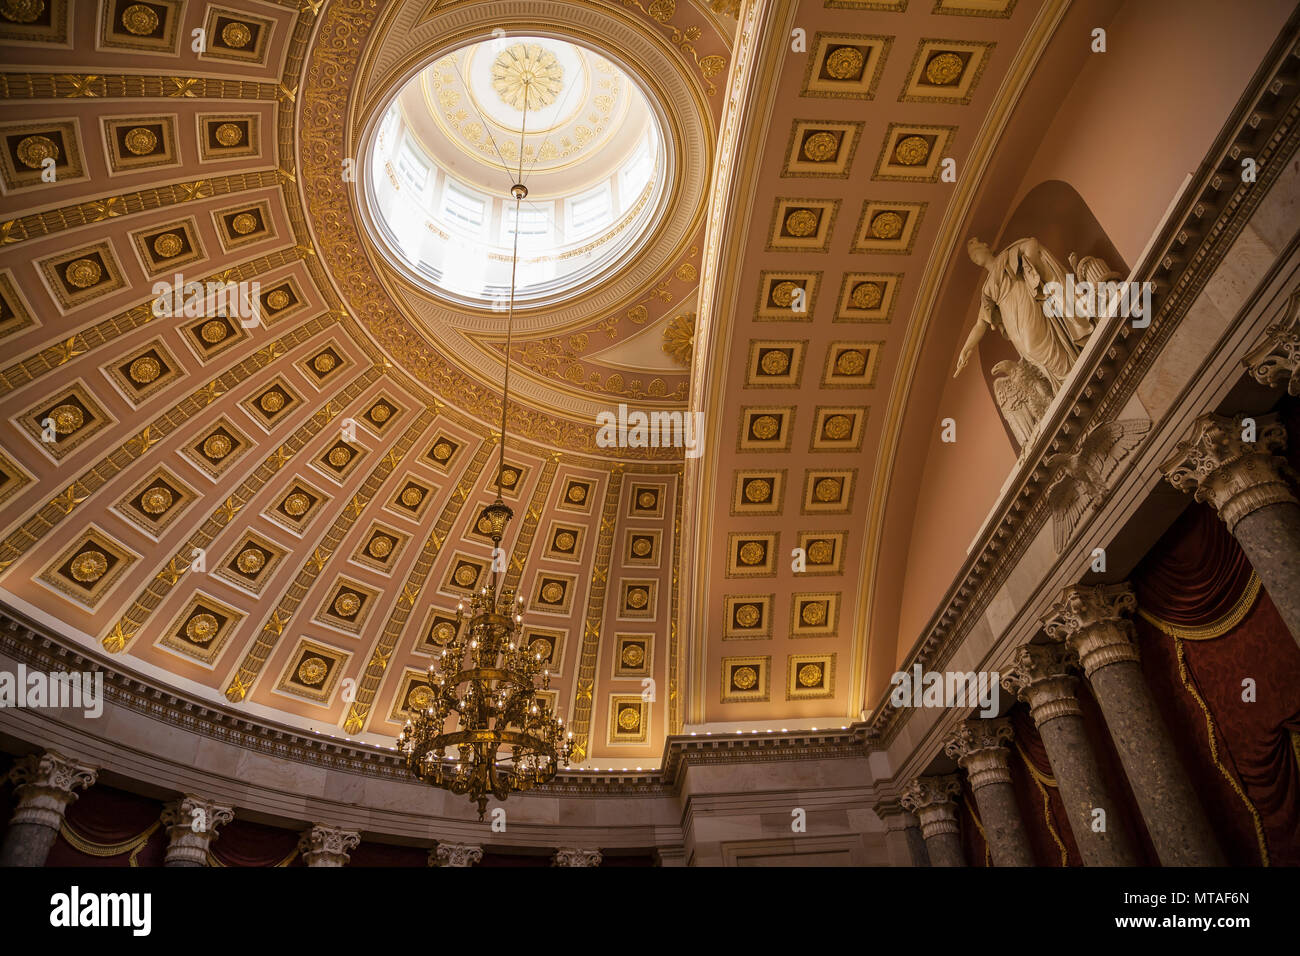 Ceiling and chandelier inside the Capitol Hill, Washington DC, USA Stock Photo